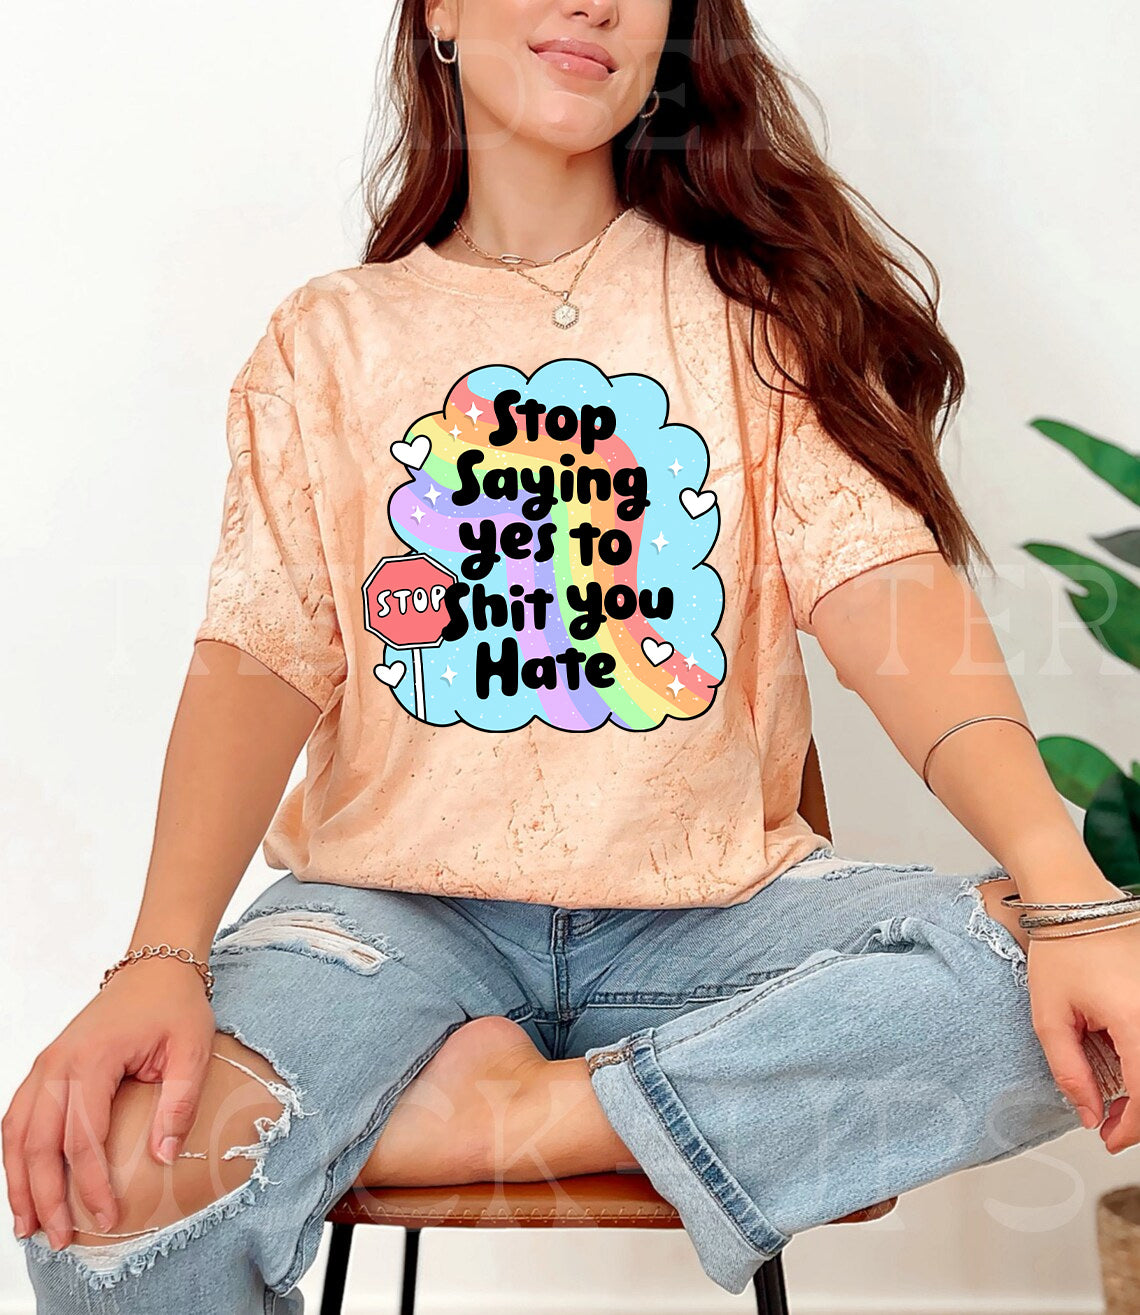 Stop Saying Yes to S*** You Hate Graphic Tee